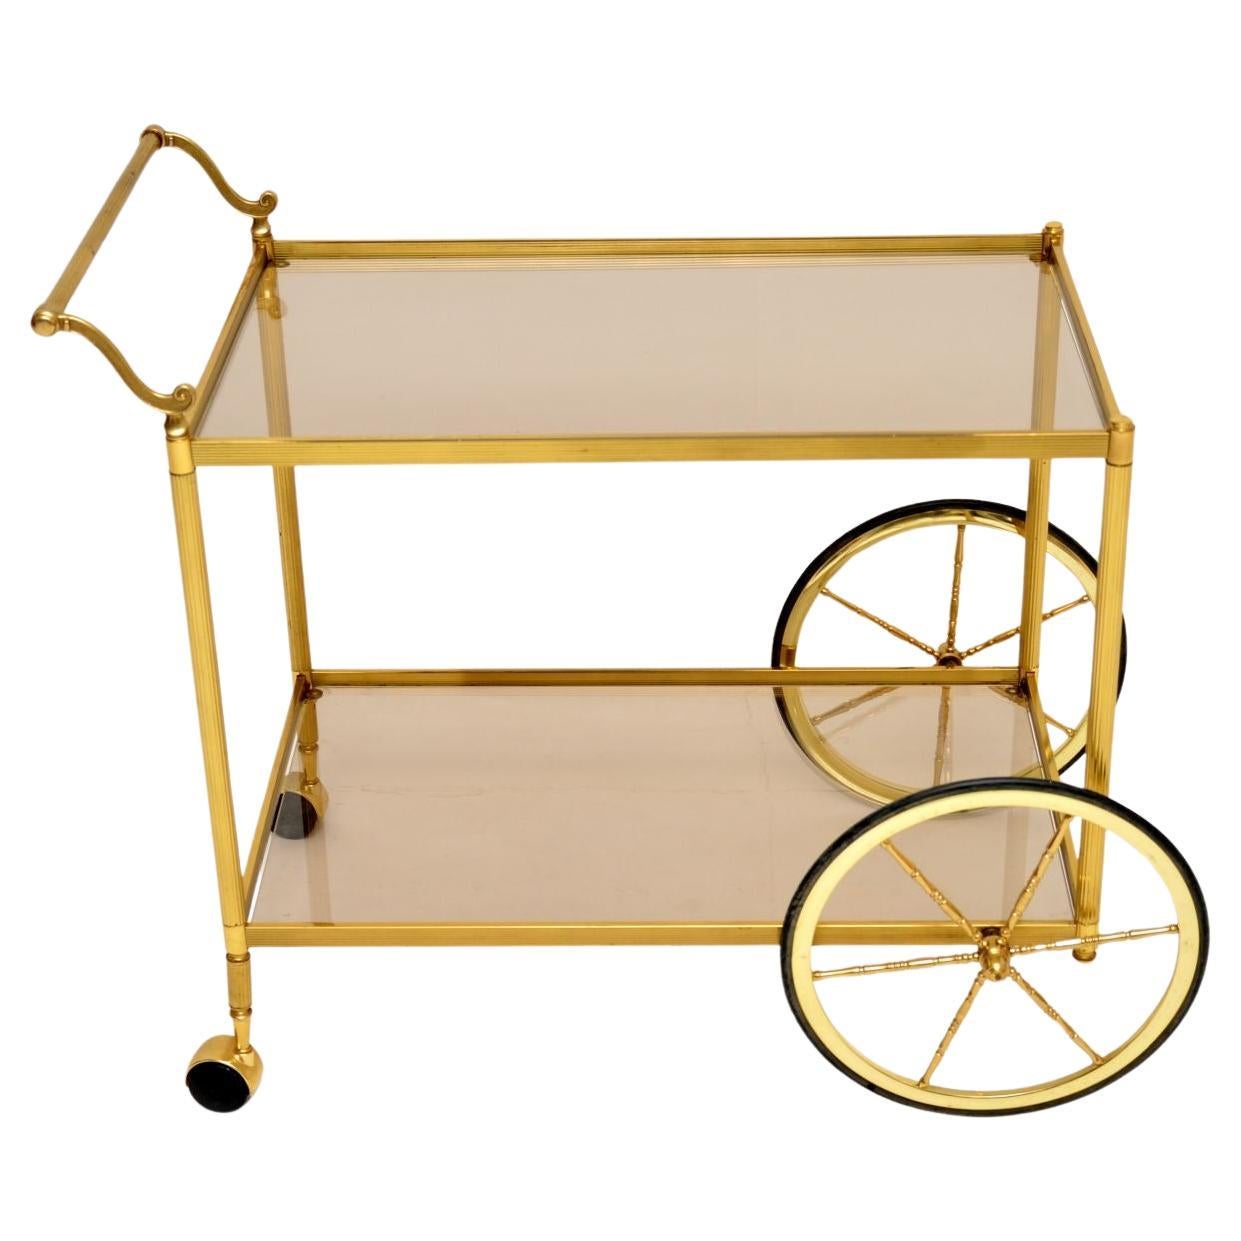 1970’s Vintage French Brass Drinks Trolley / Bar Cart For Sale